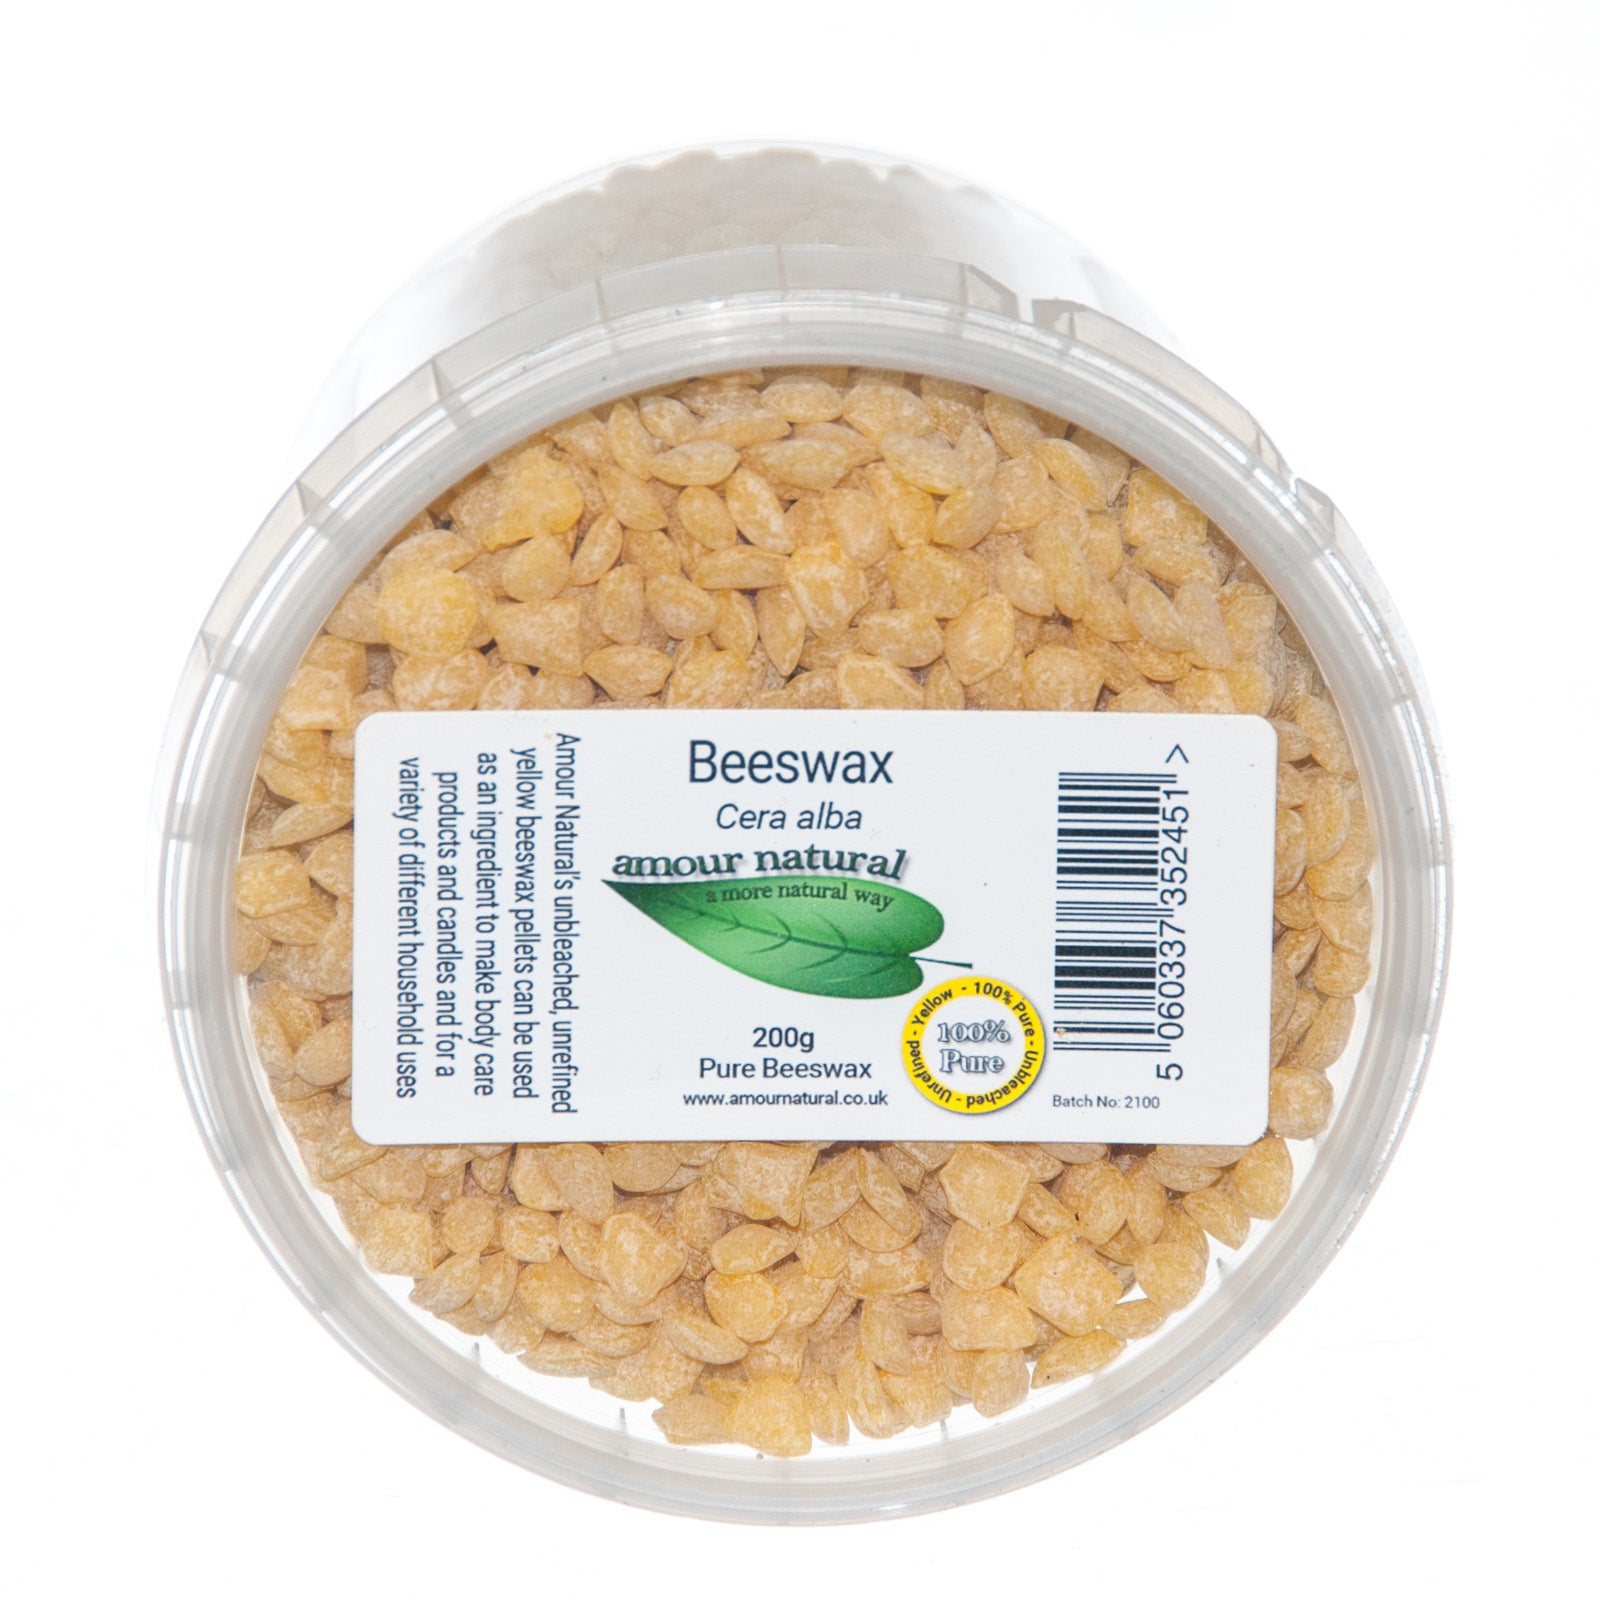 Amour Natural Beeswax Pellets